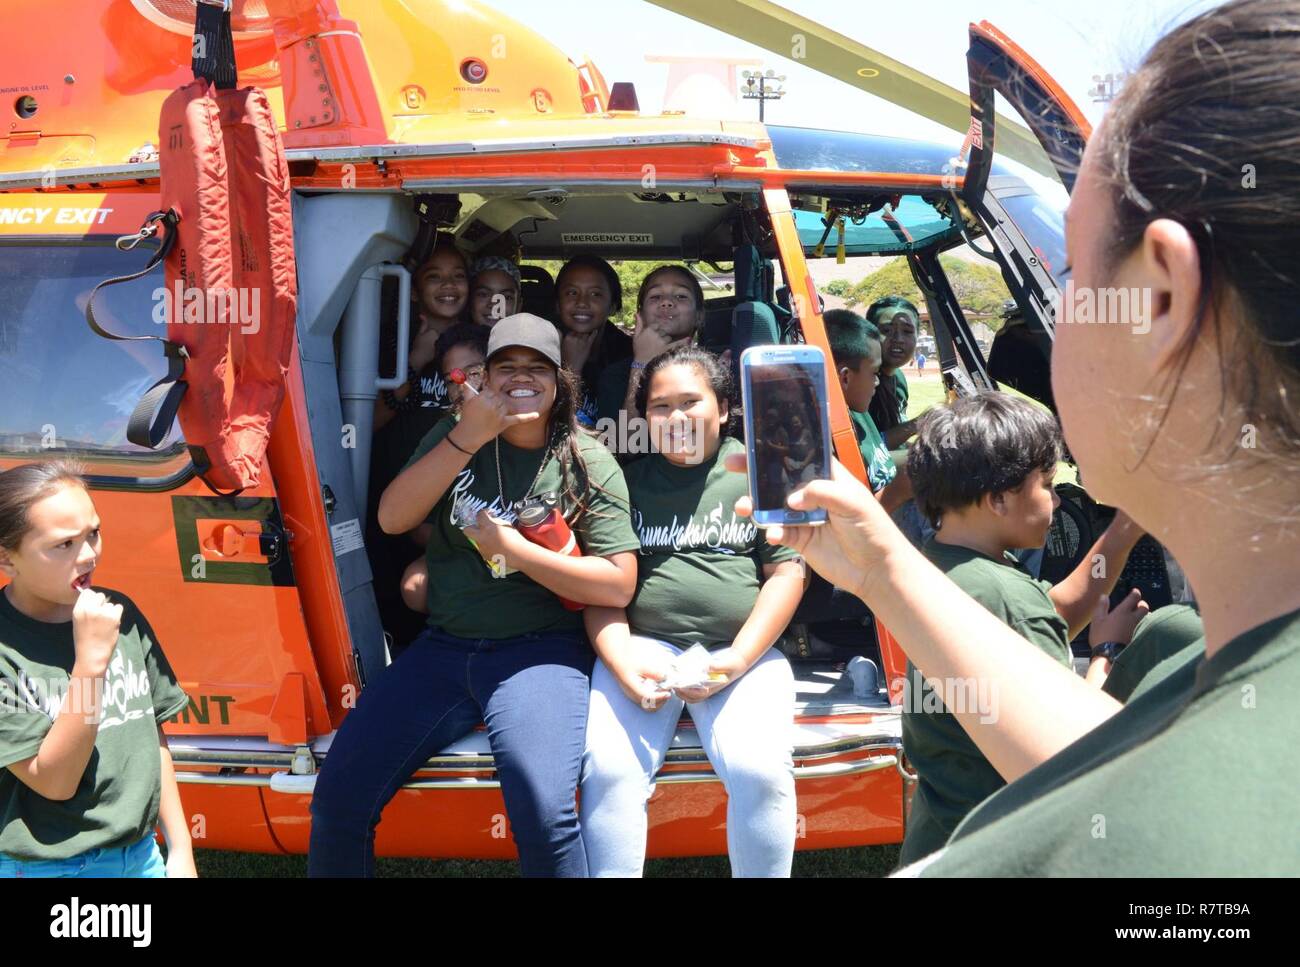 Students smile for a photo in an MH-65 Dolphin Helicopter from Coast Guard Air Station Barbers Point, Oahu, during a D.A.R.E. event for Kualapuu Public Charter School children at Kaunakakai Ball Park, Molokai, April 7, 2016. The rally was held to educate the children on the dangers of drugs and also included demonstrations from Coast Guard Air Station Barbers Point, National Guard, Maui Police Department, Maui County Fire Department, Hawaii Department of Land and Natural Resources and several other agencies. Stock Photo